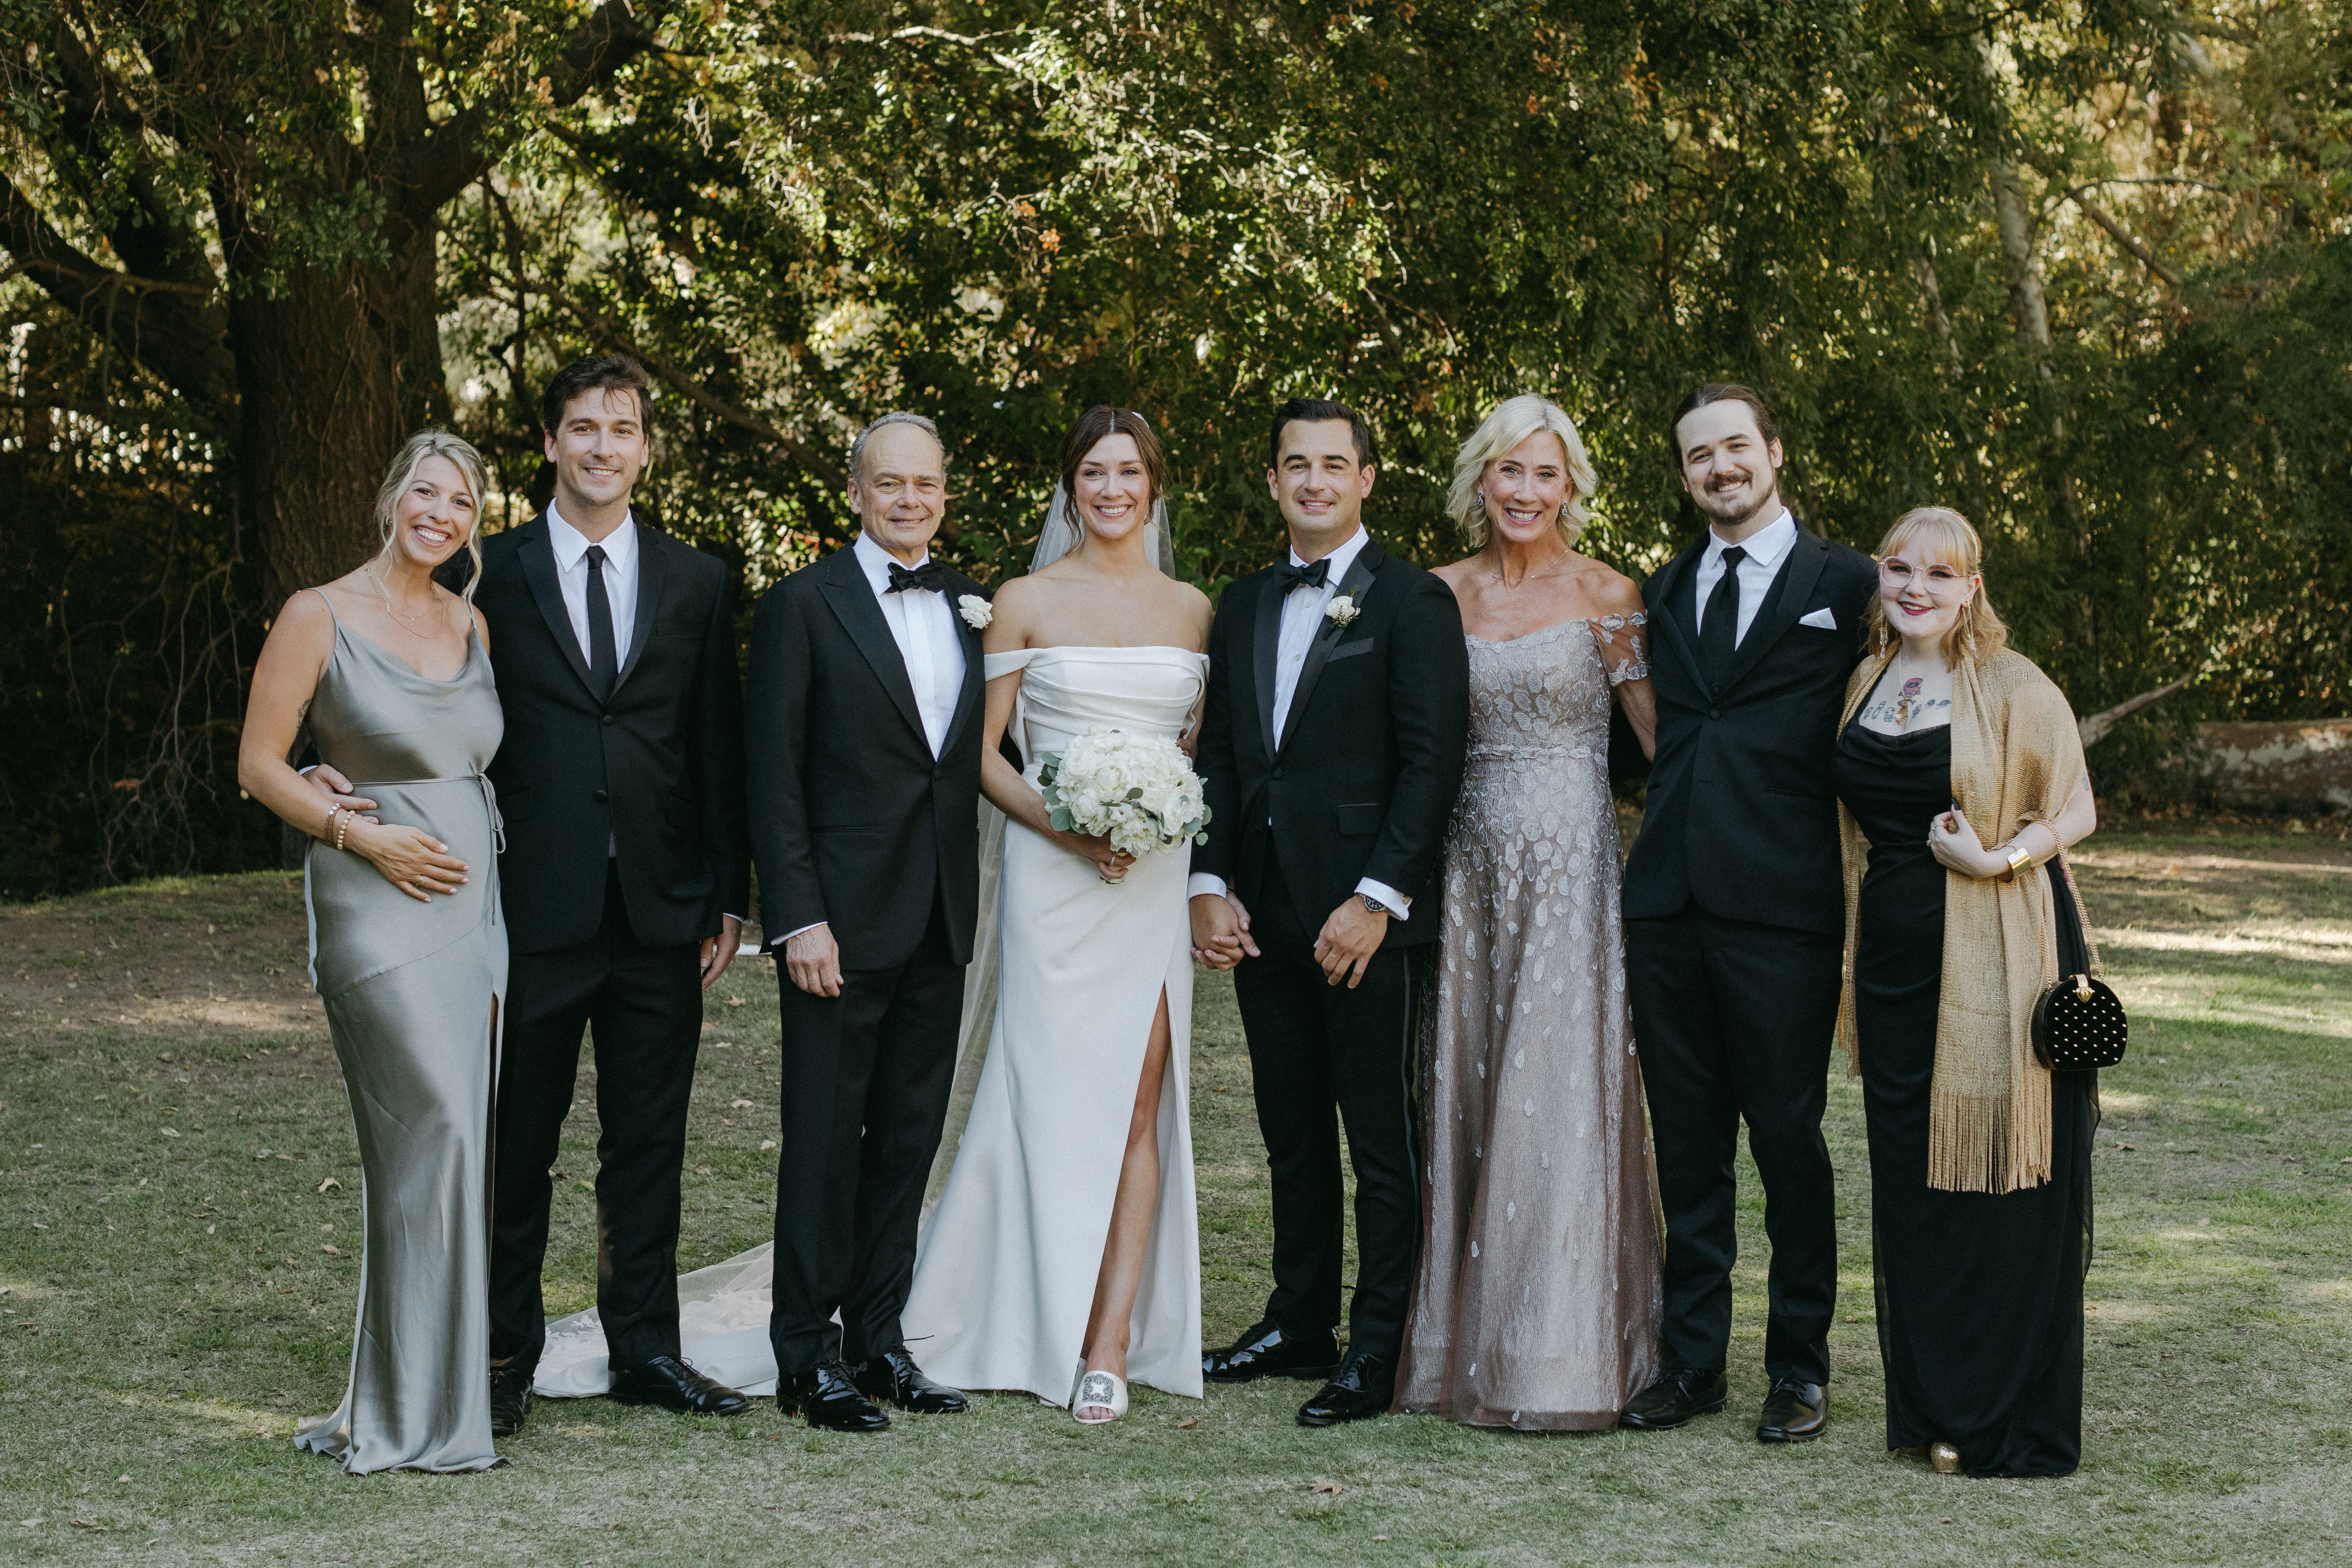 Celebrating the marriage of Ellie and Ben Bobit. Left to right: Marisa, Nick, Luke, Ellie, Ben, Rancy, Christopher and fiance Brynna White